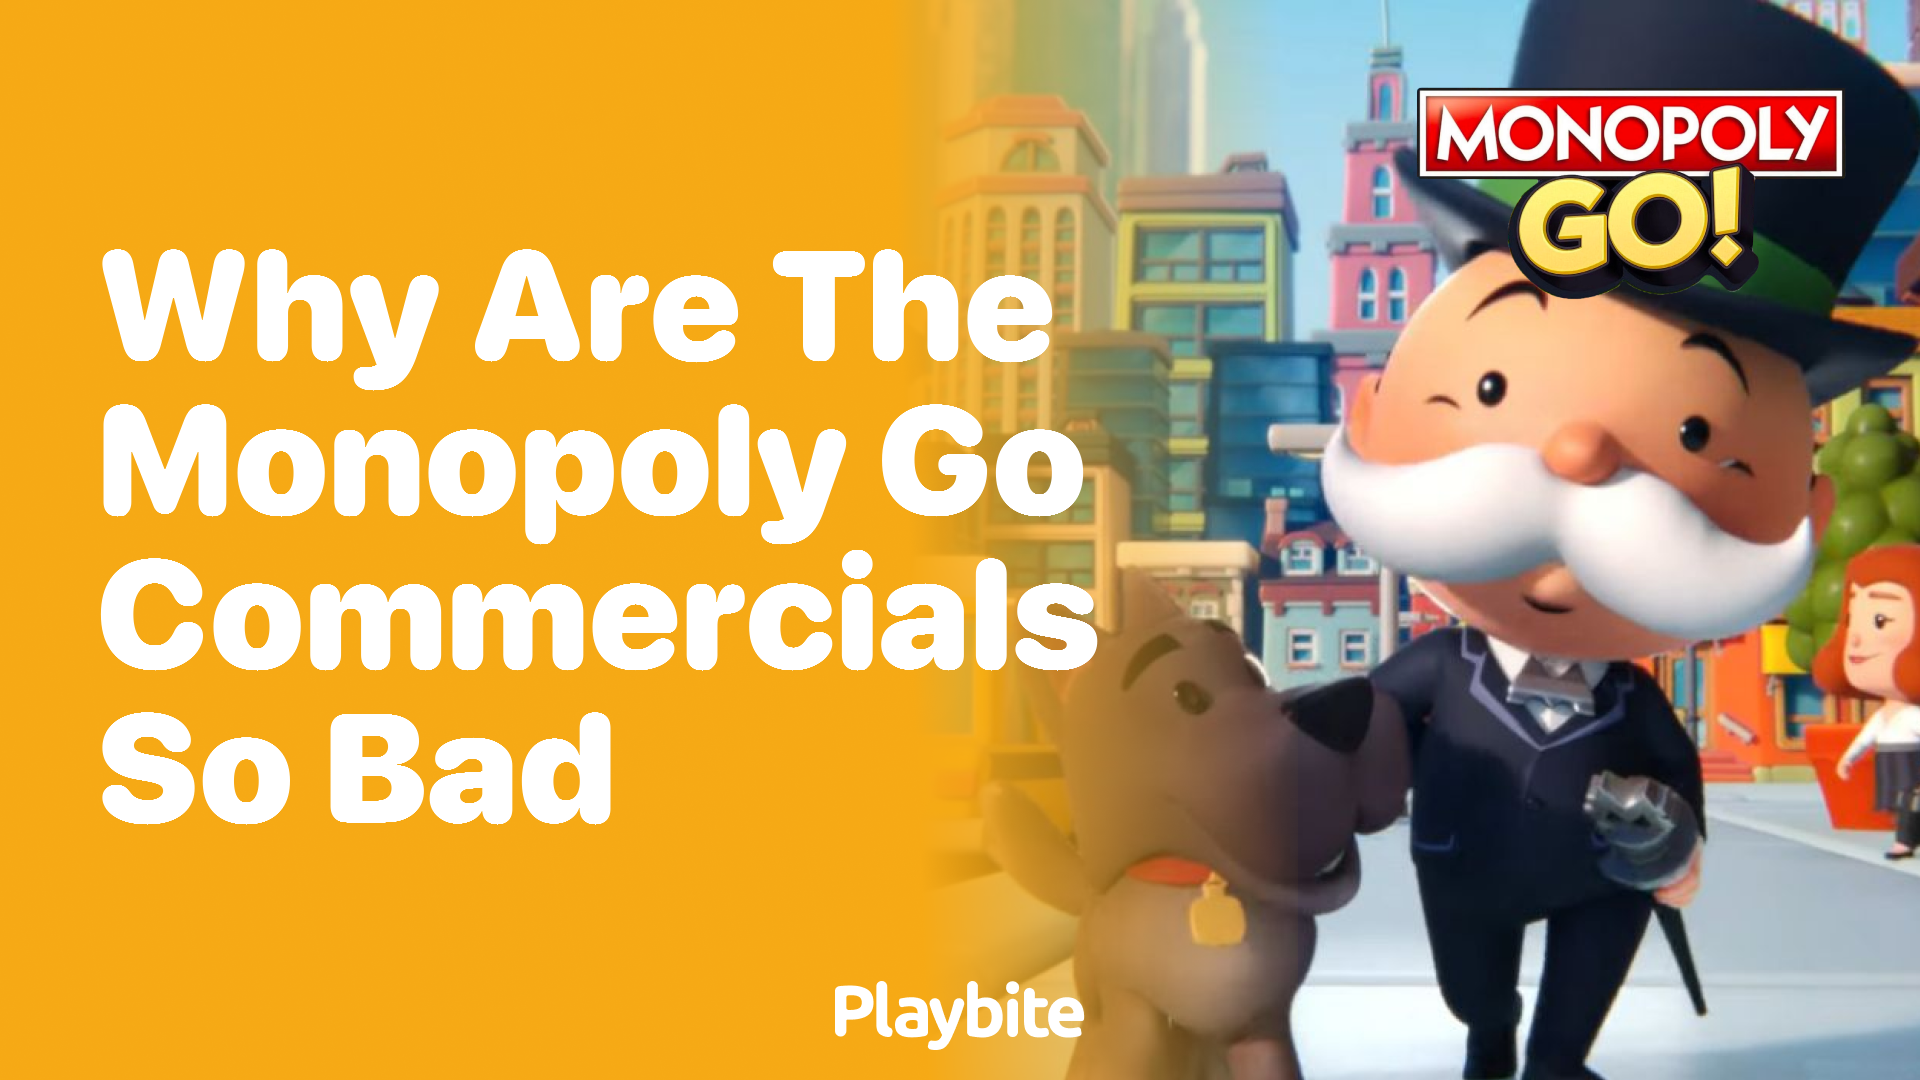 Why Are the Monopoly Go Commercials Considered So Bad?